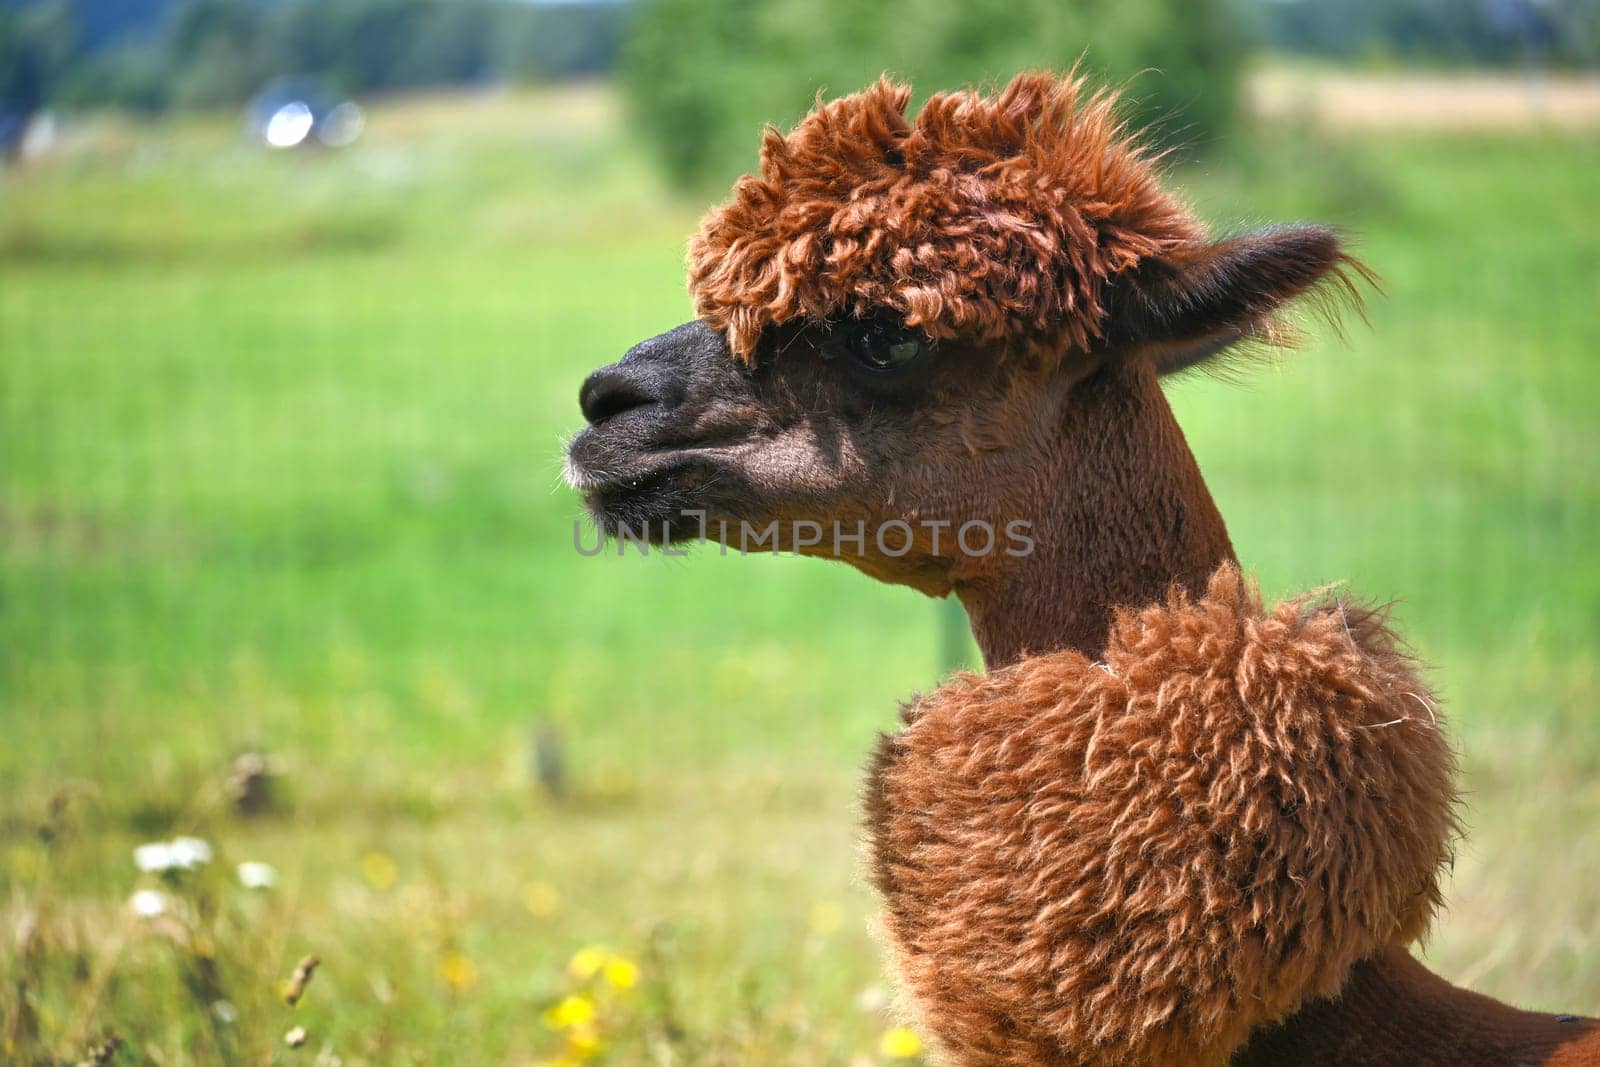 Brown alpaca with a thick, fluffy coat and a pronounced hairstyle stands in a green field